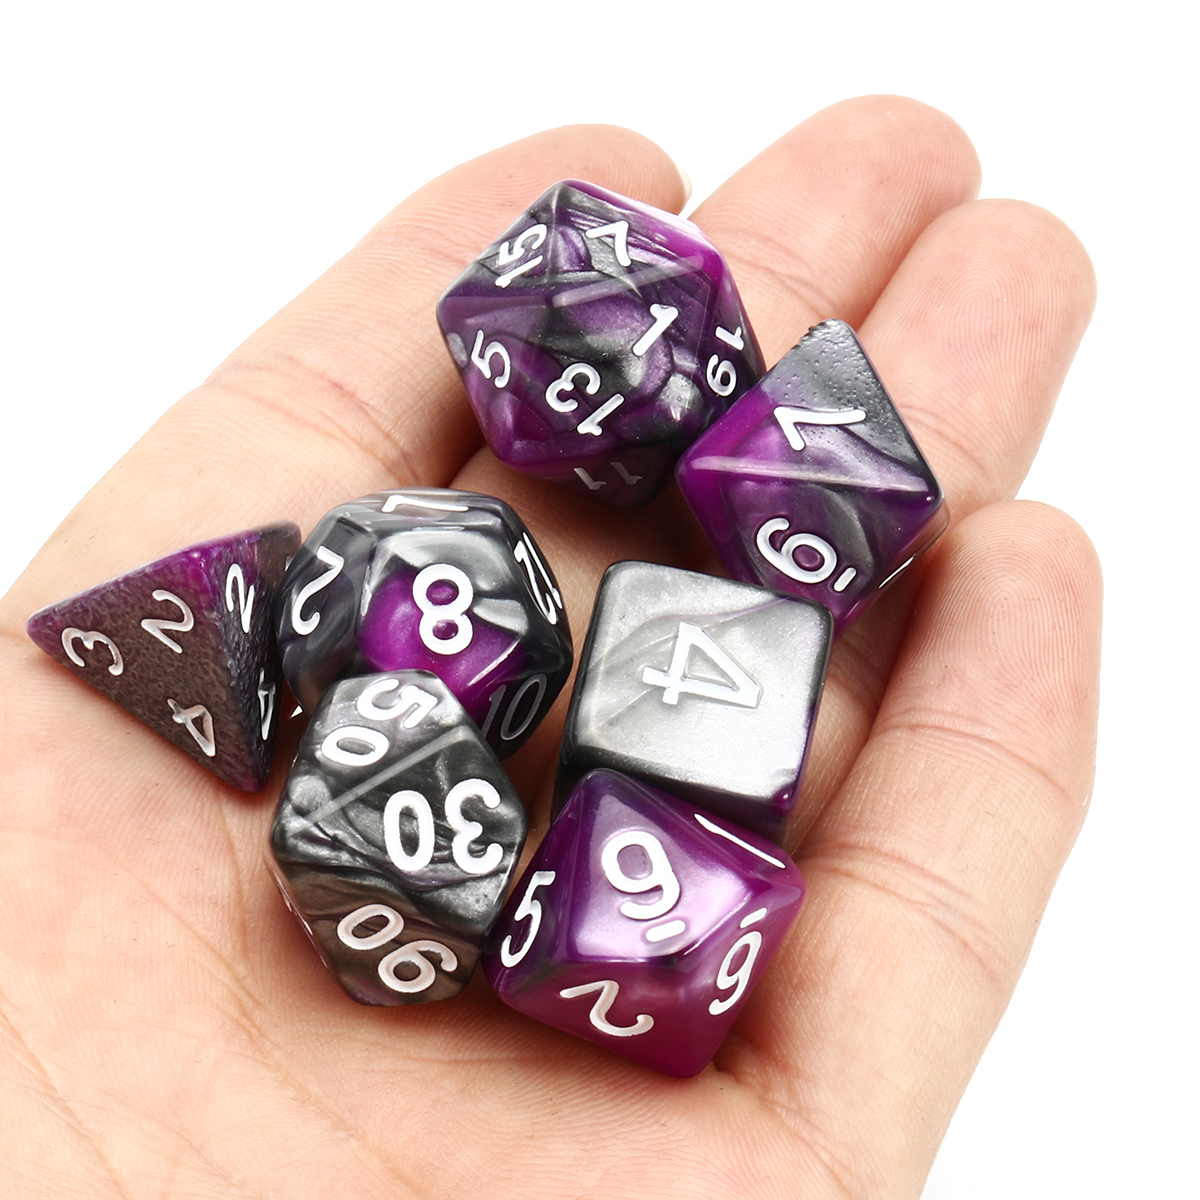 7Pcs-Purple-Gemini-Acrylic-Polyhedral-Dice-For-Dungeons-Dragons-RPG-RPG-With-Bag-1303425-2